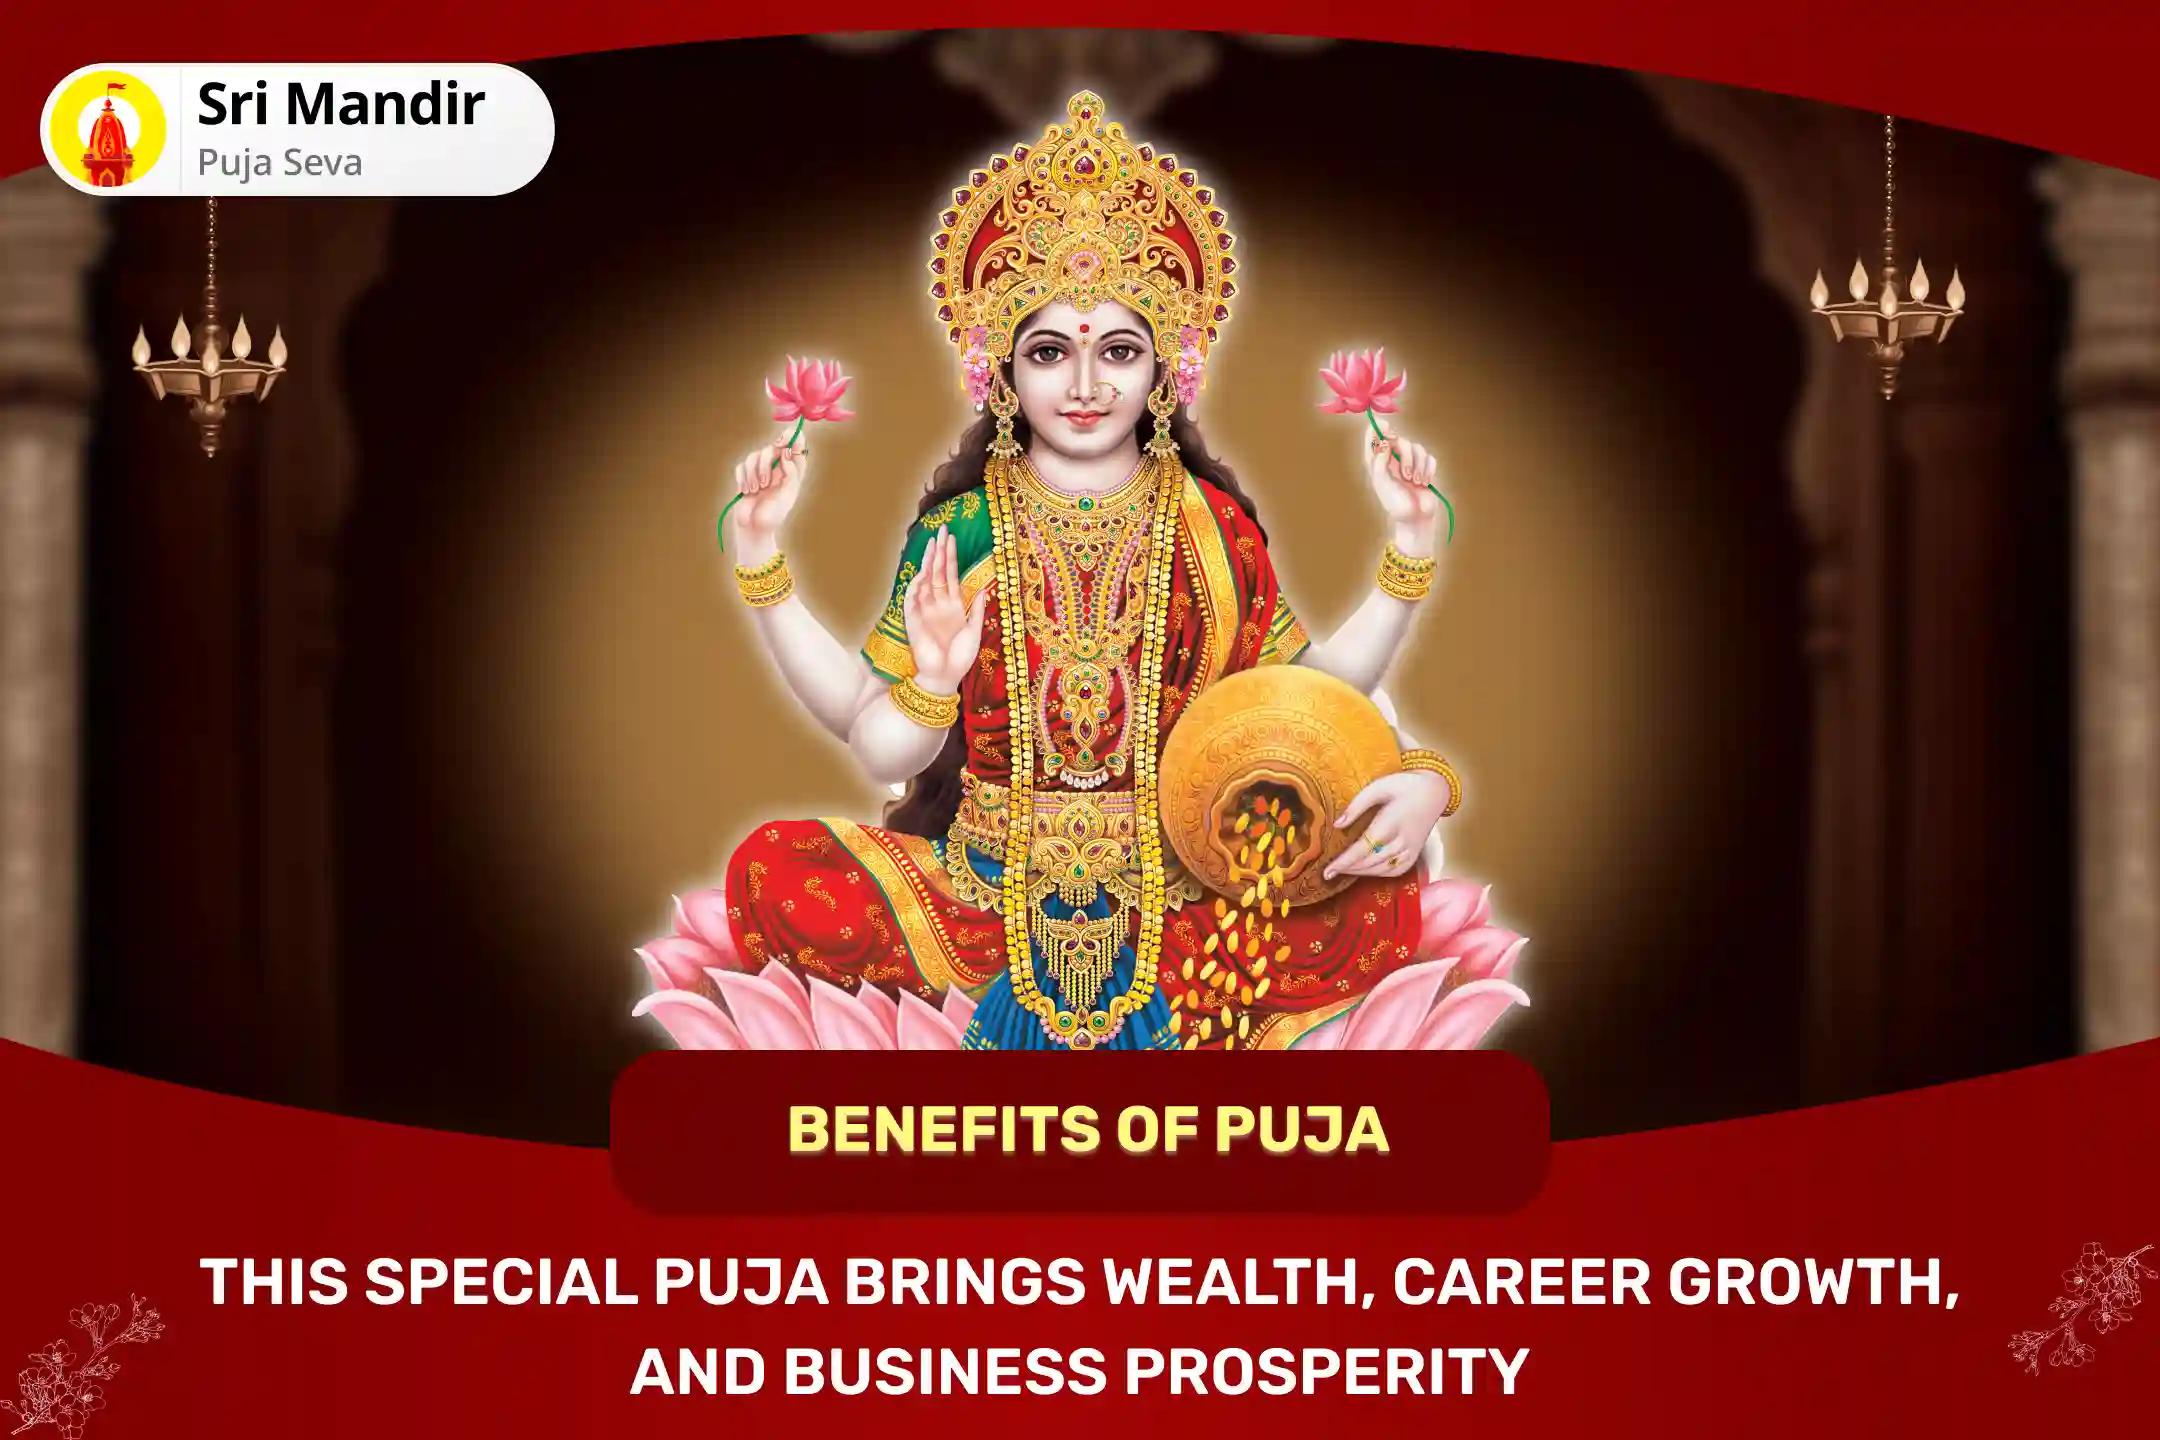 Shaktipeeth Kolhapur Ambabai Special Puja For Growth in Business and Career